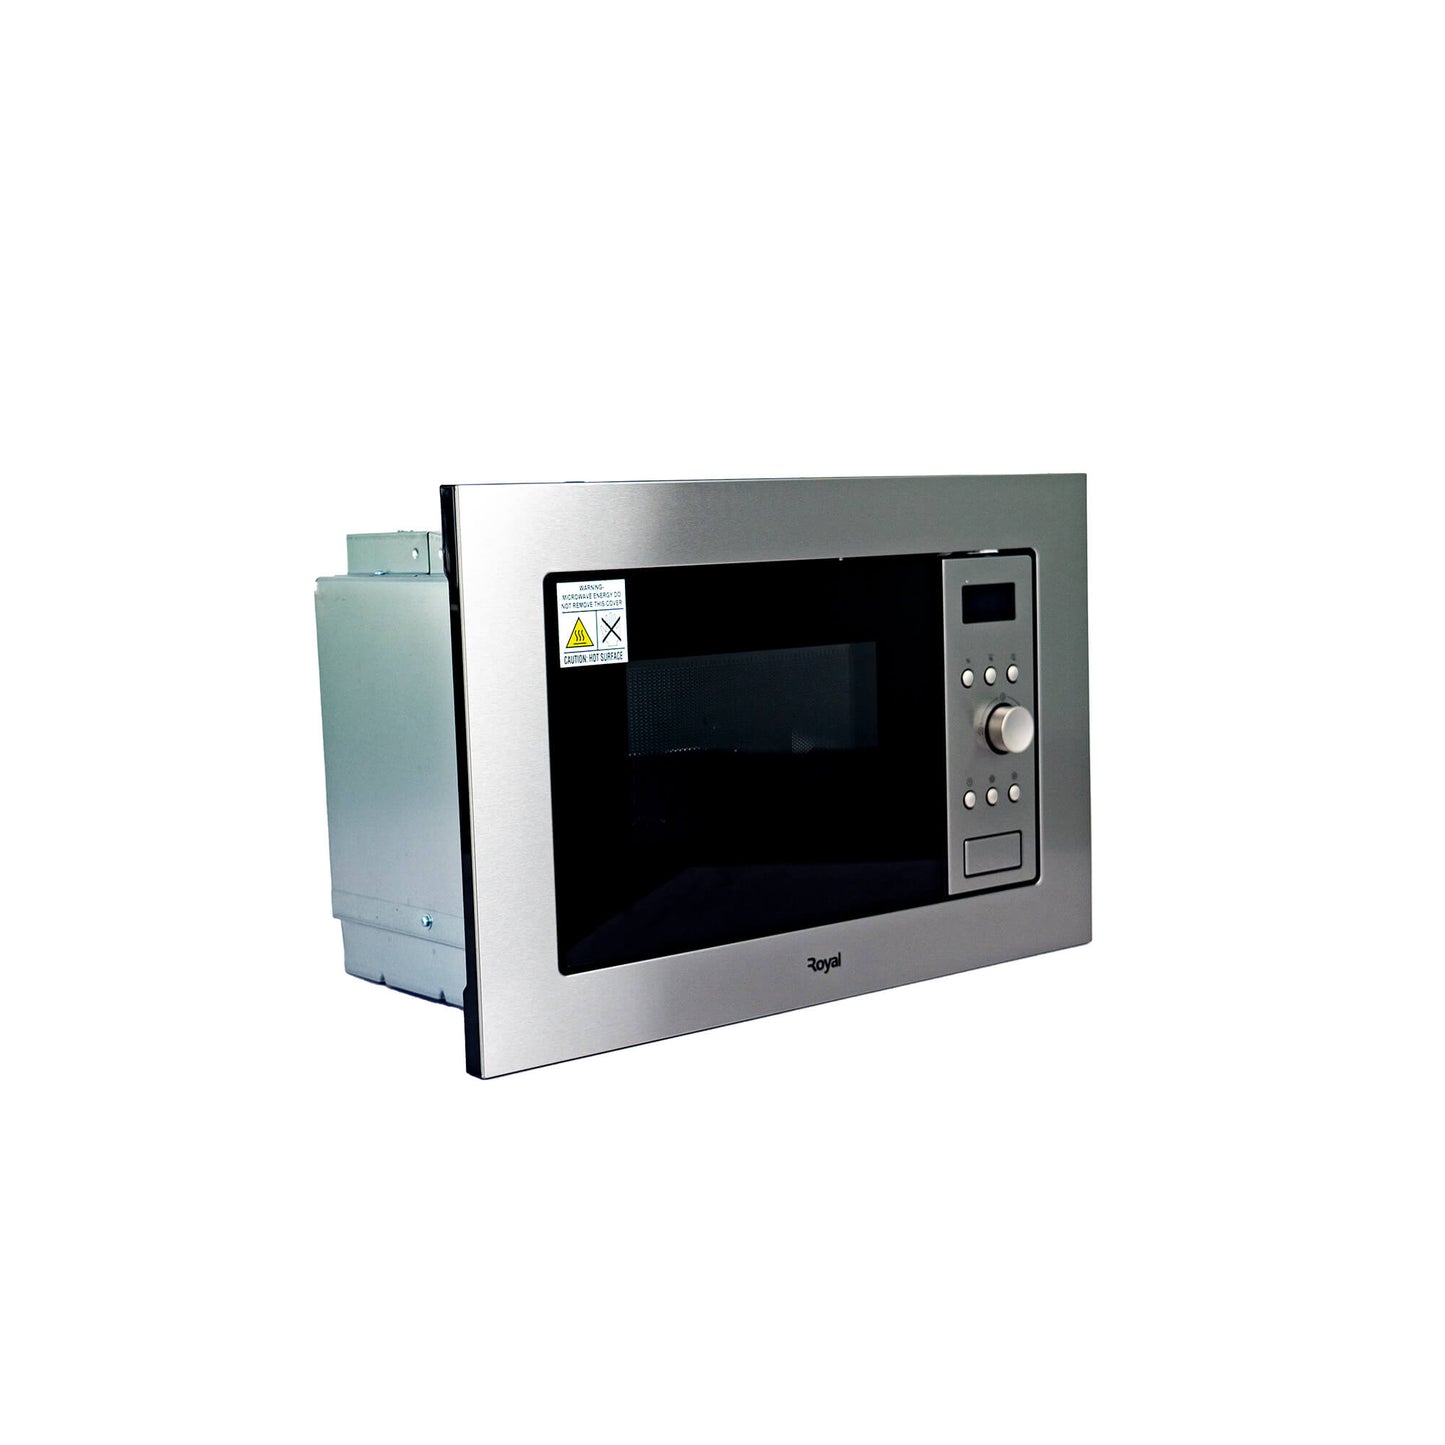 Royal 25-Litre Built-In Microwave Oven RBIMW25S